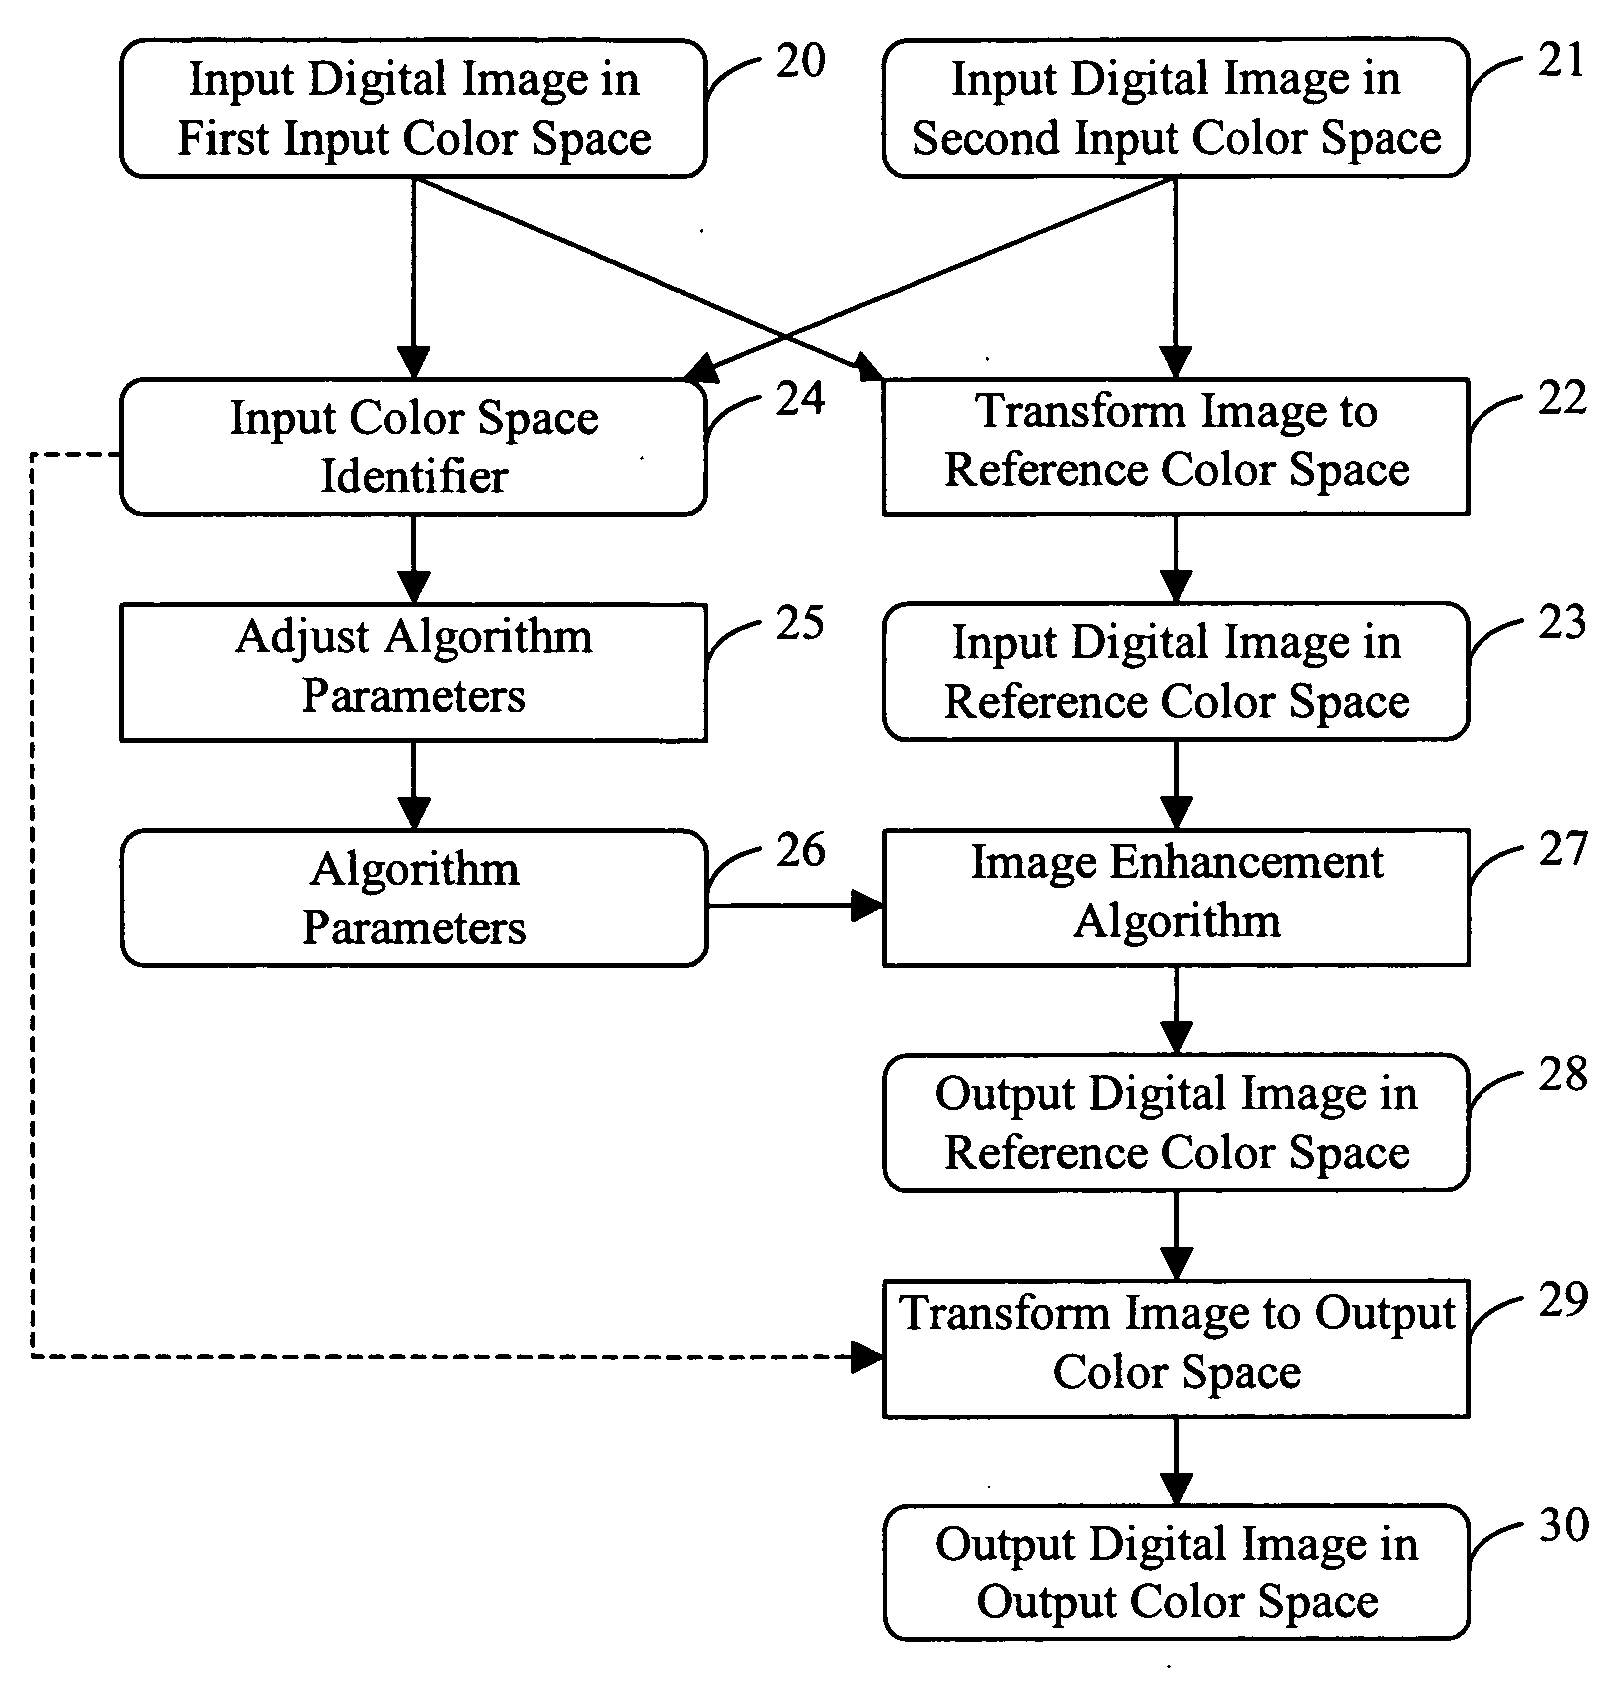 Applying an adjusted image enhancement algorithm to a digital image